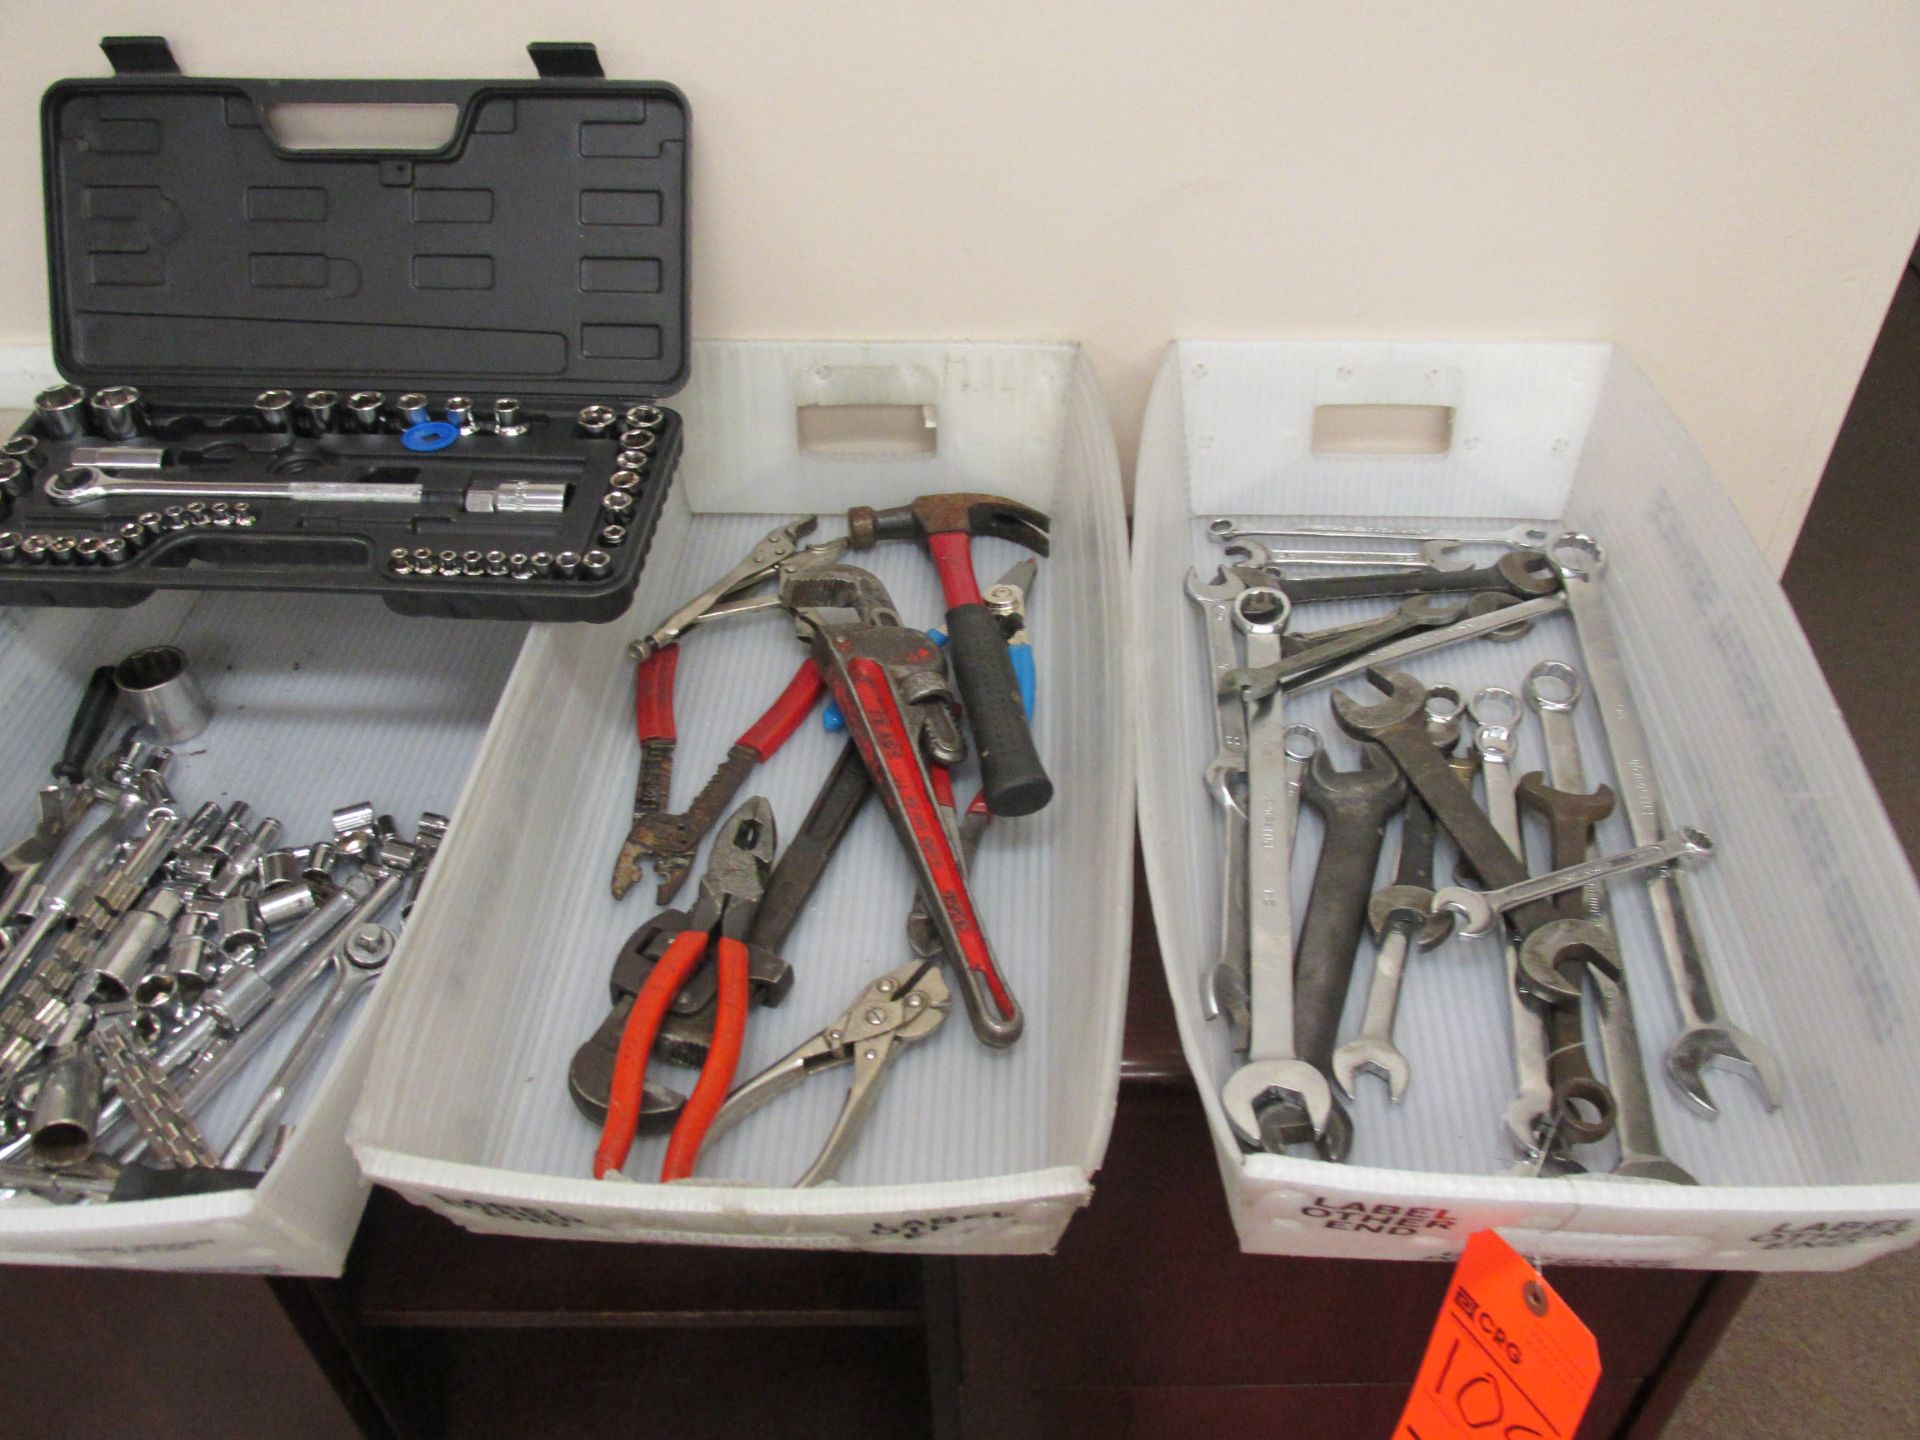 Lot of assorted hand tools - sockets, wrenches, drills, saws, allen wrenches, etc. - Image 3 of 4